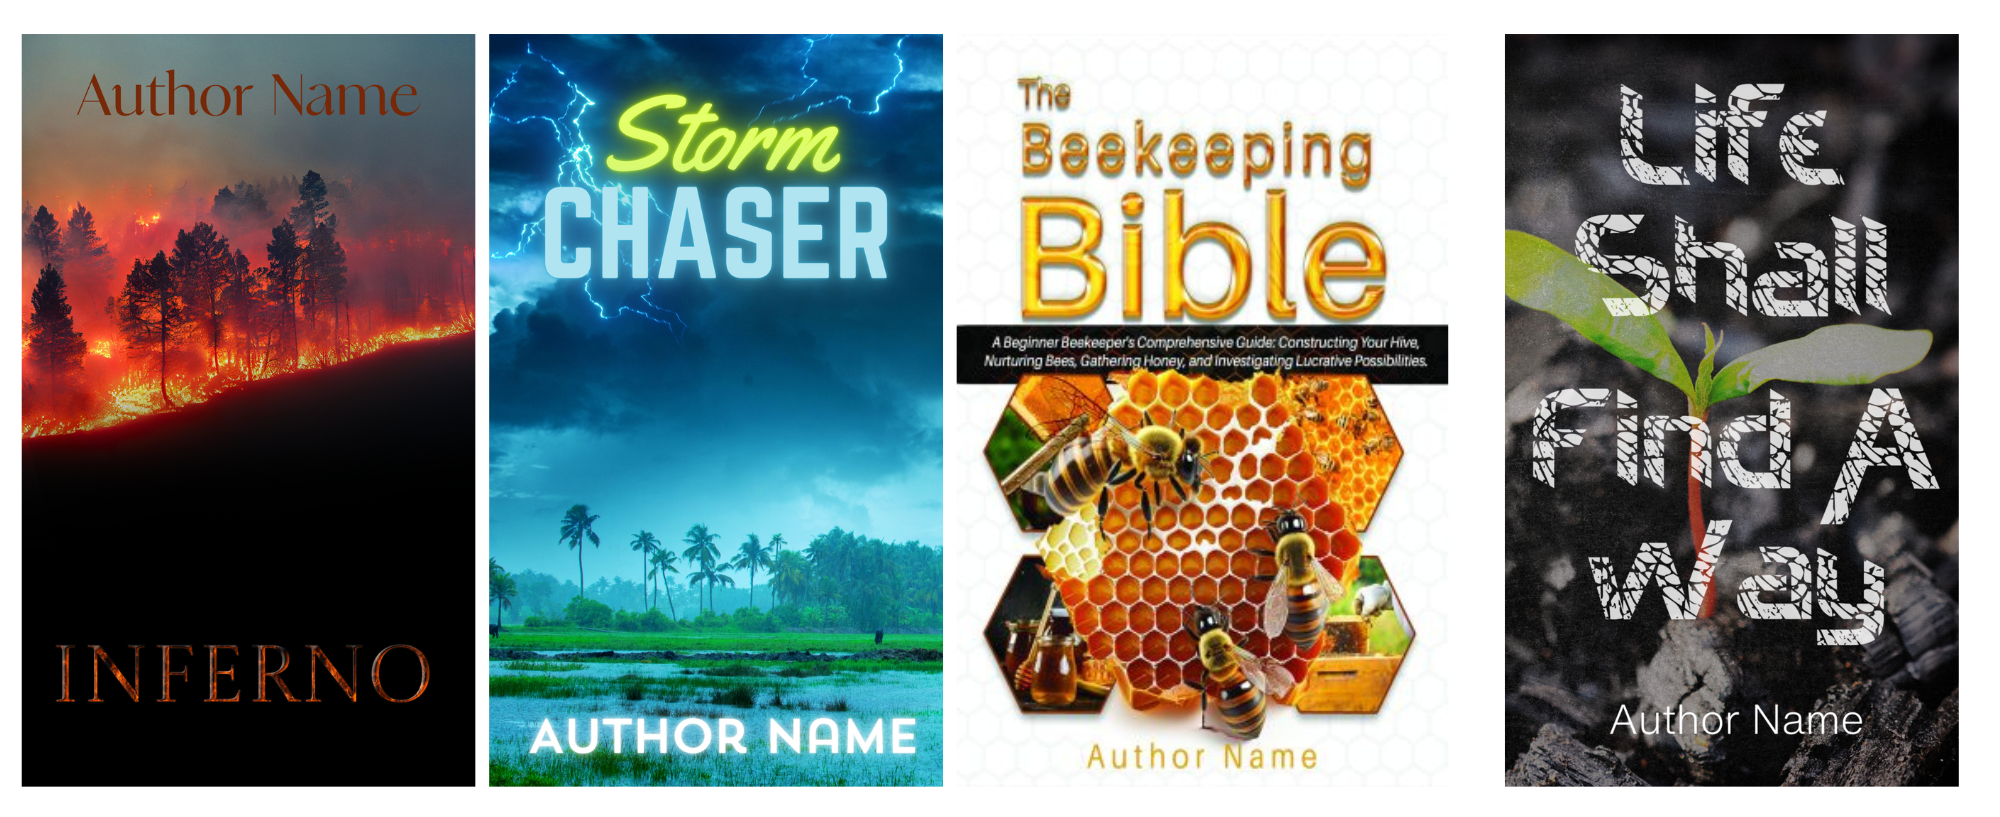 A series of four book covers. From left: "Inferno" features a forest fire, "Storm Chaser" depicts a stormy sky over fields, "The Beekeeping Bible" shows a honeycomb and bees, and "Life Shall Find A Way" displays a plant sprout growing in soil. Each cover includes an author's name. BookSelf Book Cover Design & Premade Book Covers